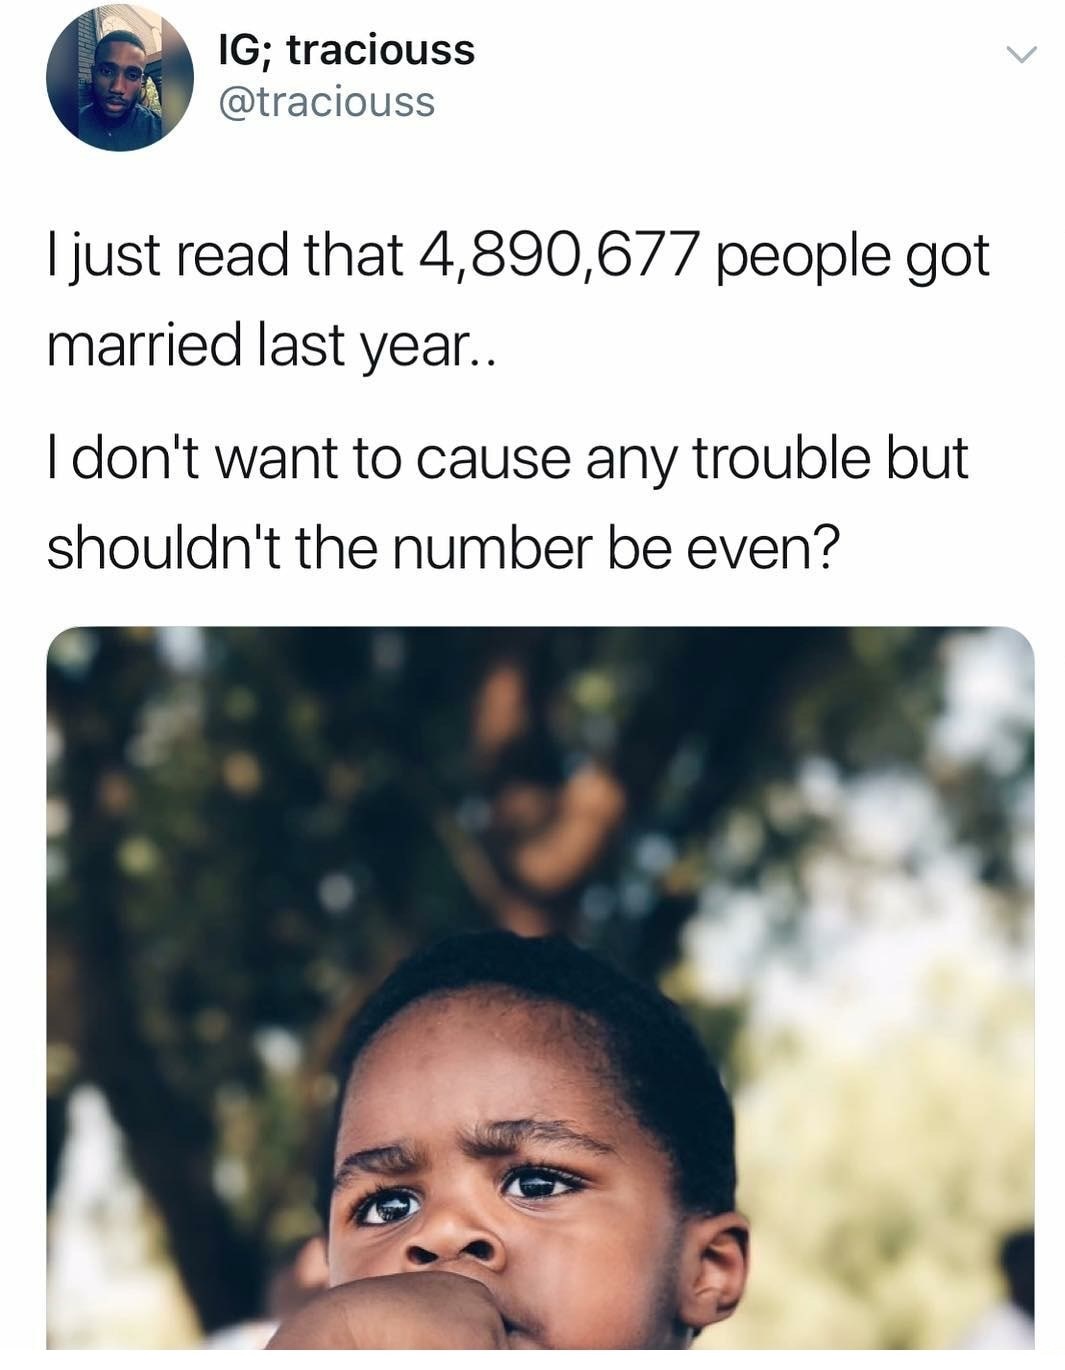 dank meme shouldn t the number be even - Ig; traciouss I just read that 4,890,677 people got married last year.. I don't want to cause any trouble but shouldn't the number be even?